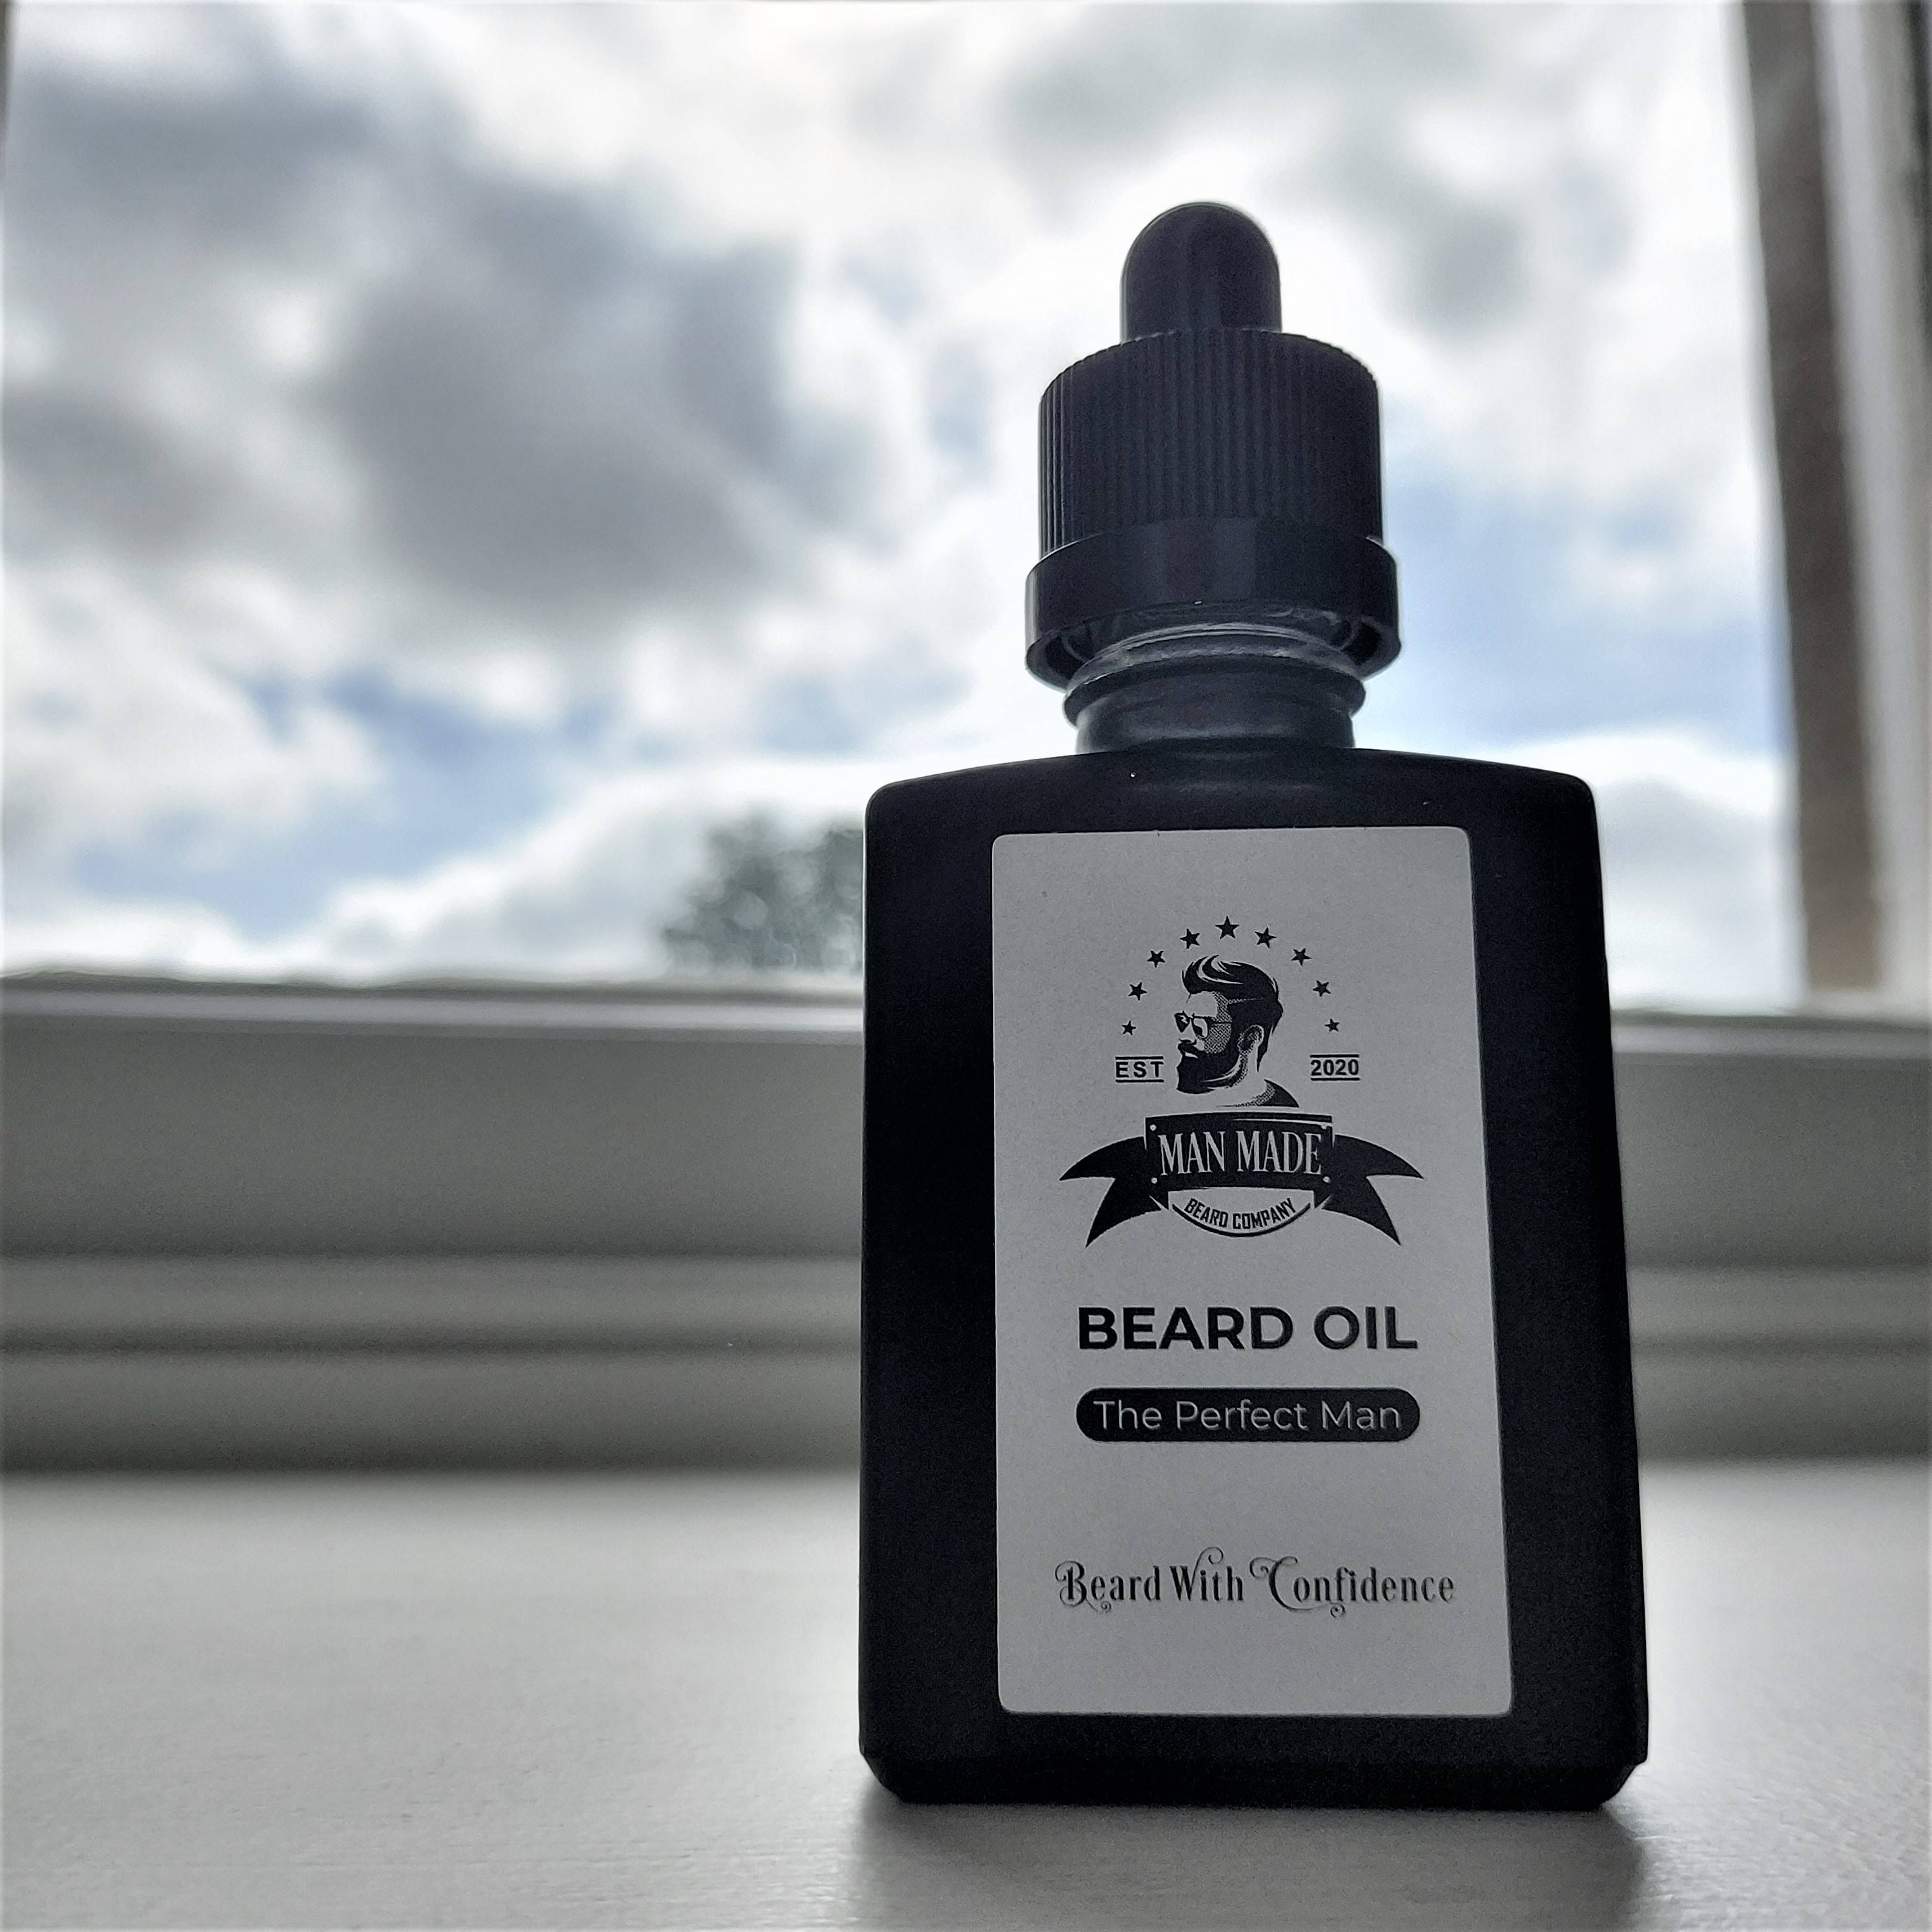 The perfect man beard oil pictured in a hotel room at de vere tortworth court